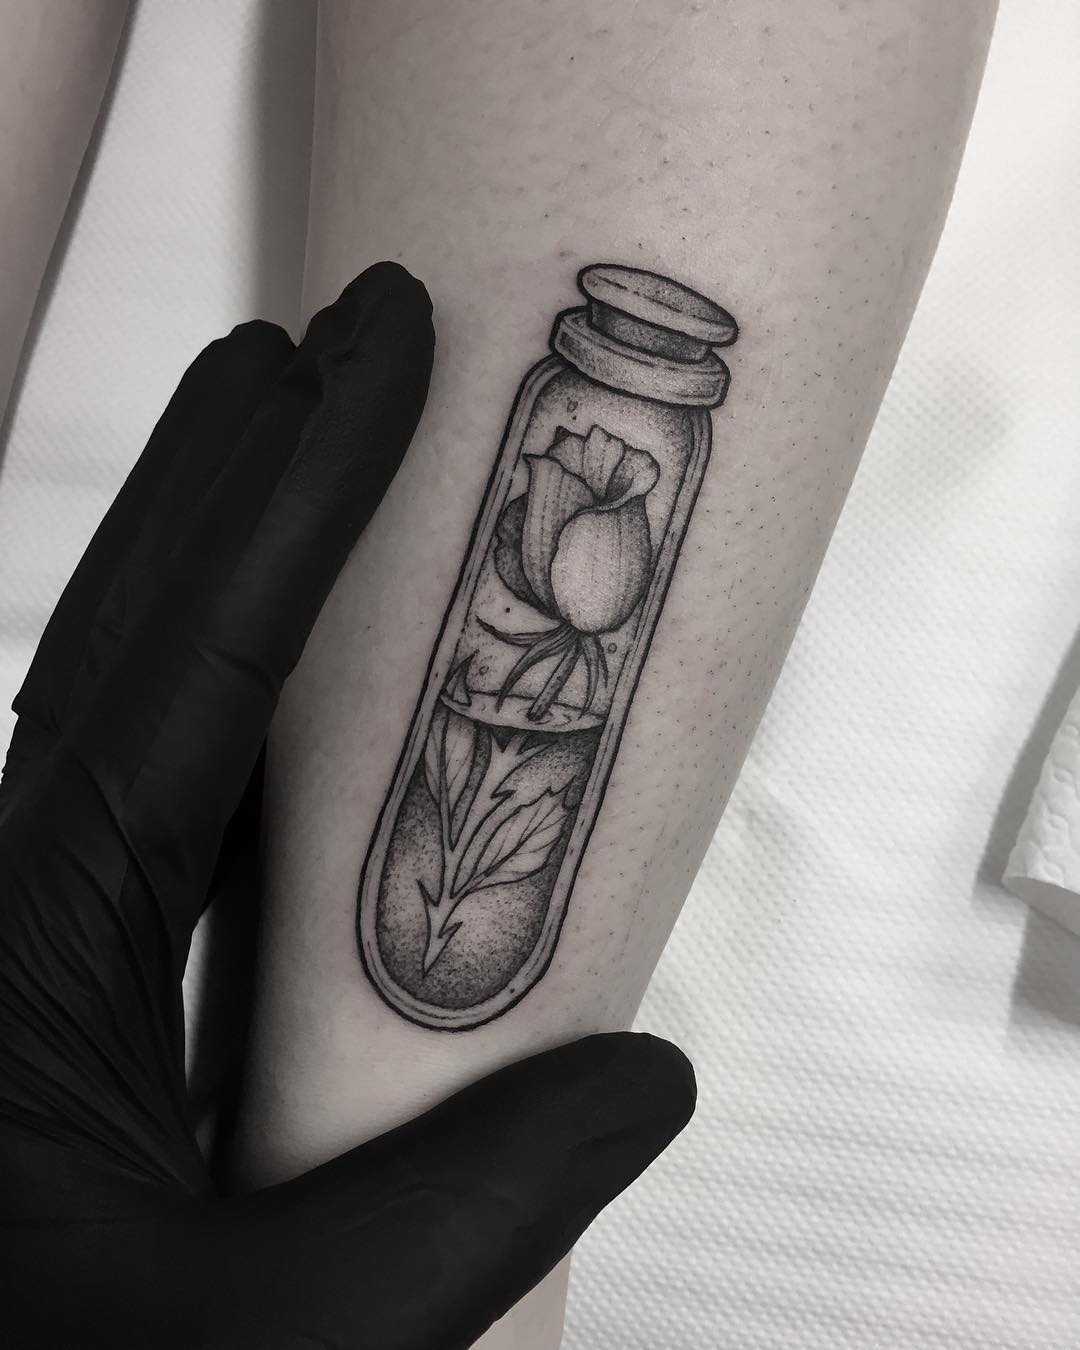 Rose in a test tube